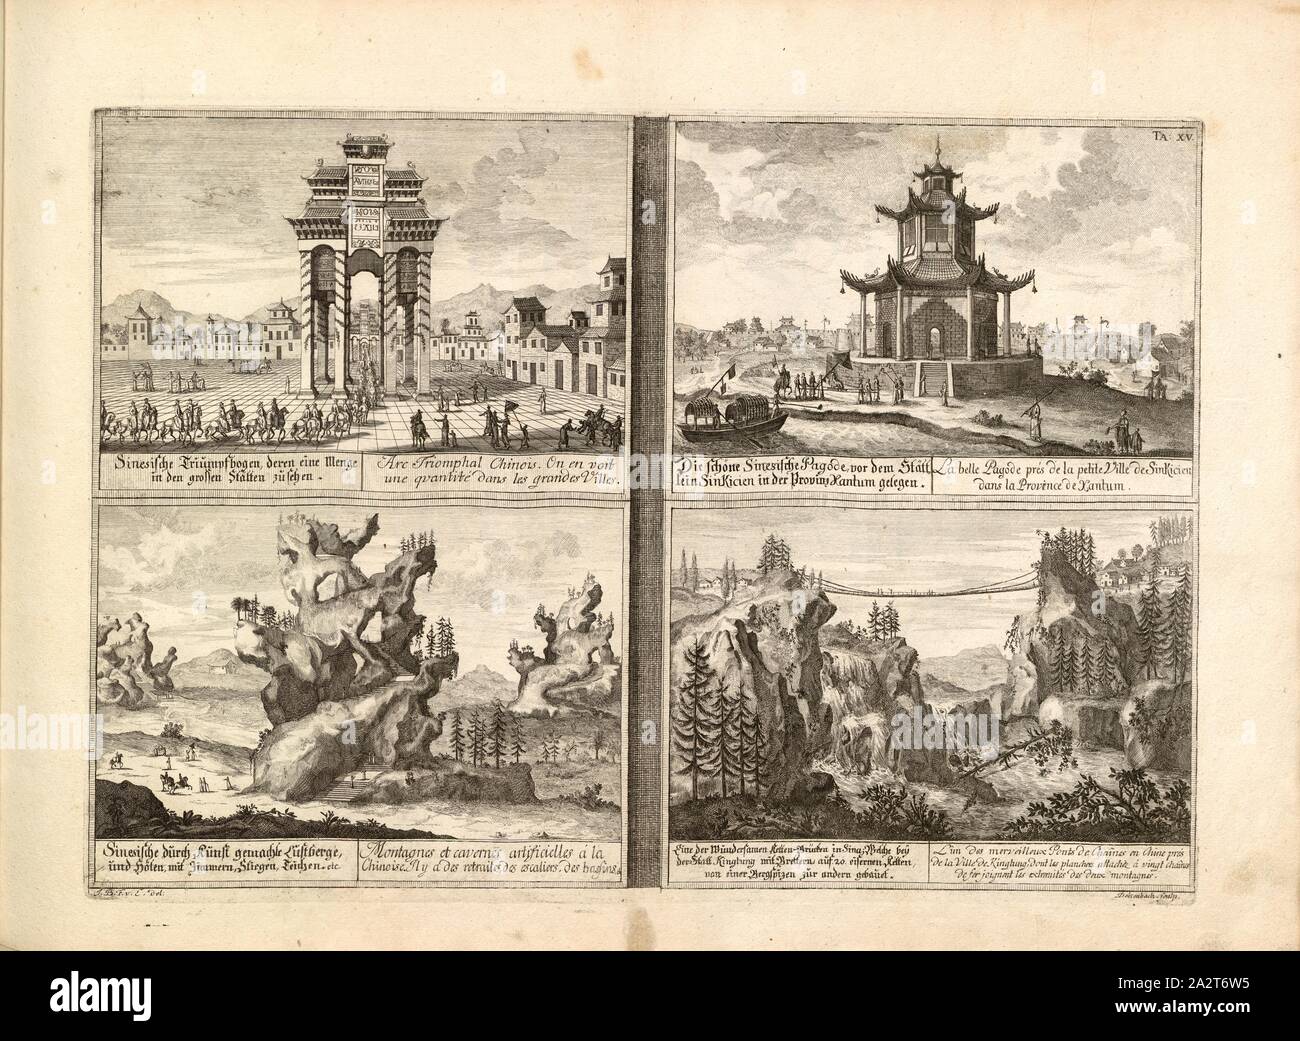 Sines triumphal arch ...; The beautiful Chinese pagoda ...; Chinese art made pleasure mountains, ...; One of the wondrous chain bridges in Sina ..., Above left: Fig. Of a Chinese triumphal arch from the 18th century, Above right: Fig. Of a Chinese pagoda in front of the small town Sinkicia from the 18th century, Below left: Illustration of a Chinese air mountain from the 18th century, below right, : Illustration of a Chain Bridge in China from the 18th century, signed: JBF v., E. del, Delsenbach Sculps, TA., XV, p. 165, Fischer von Erlach, Johann Bernhard (del.); Delsenbach, Johann Adam (sculp Stock Photo